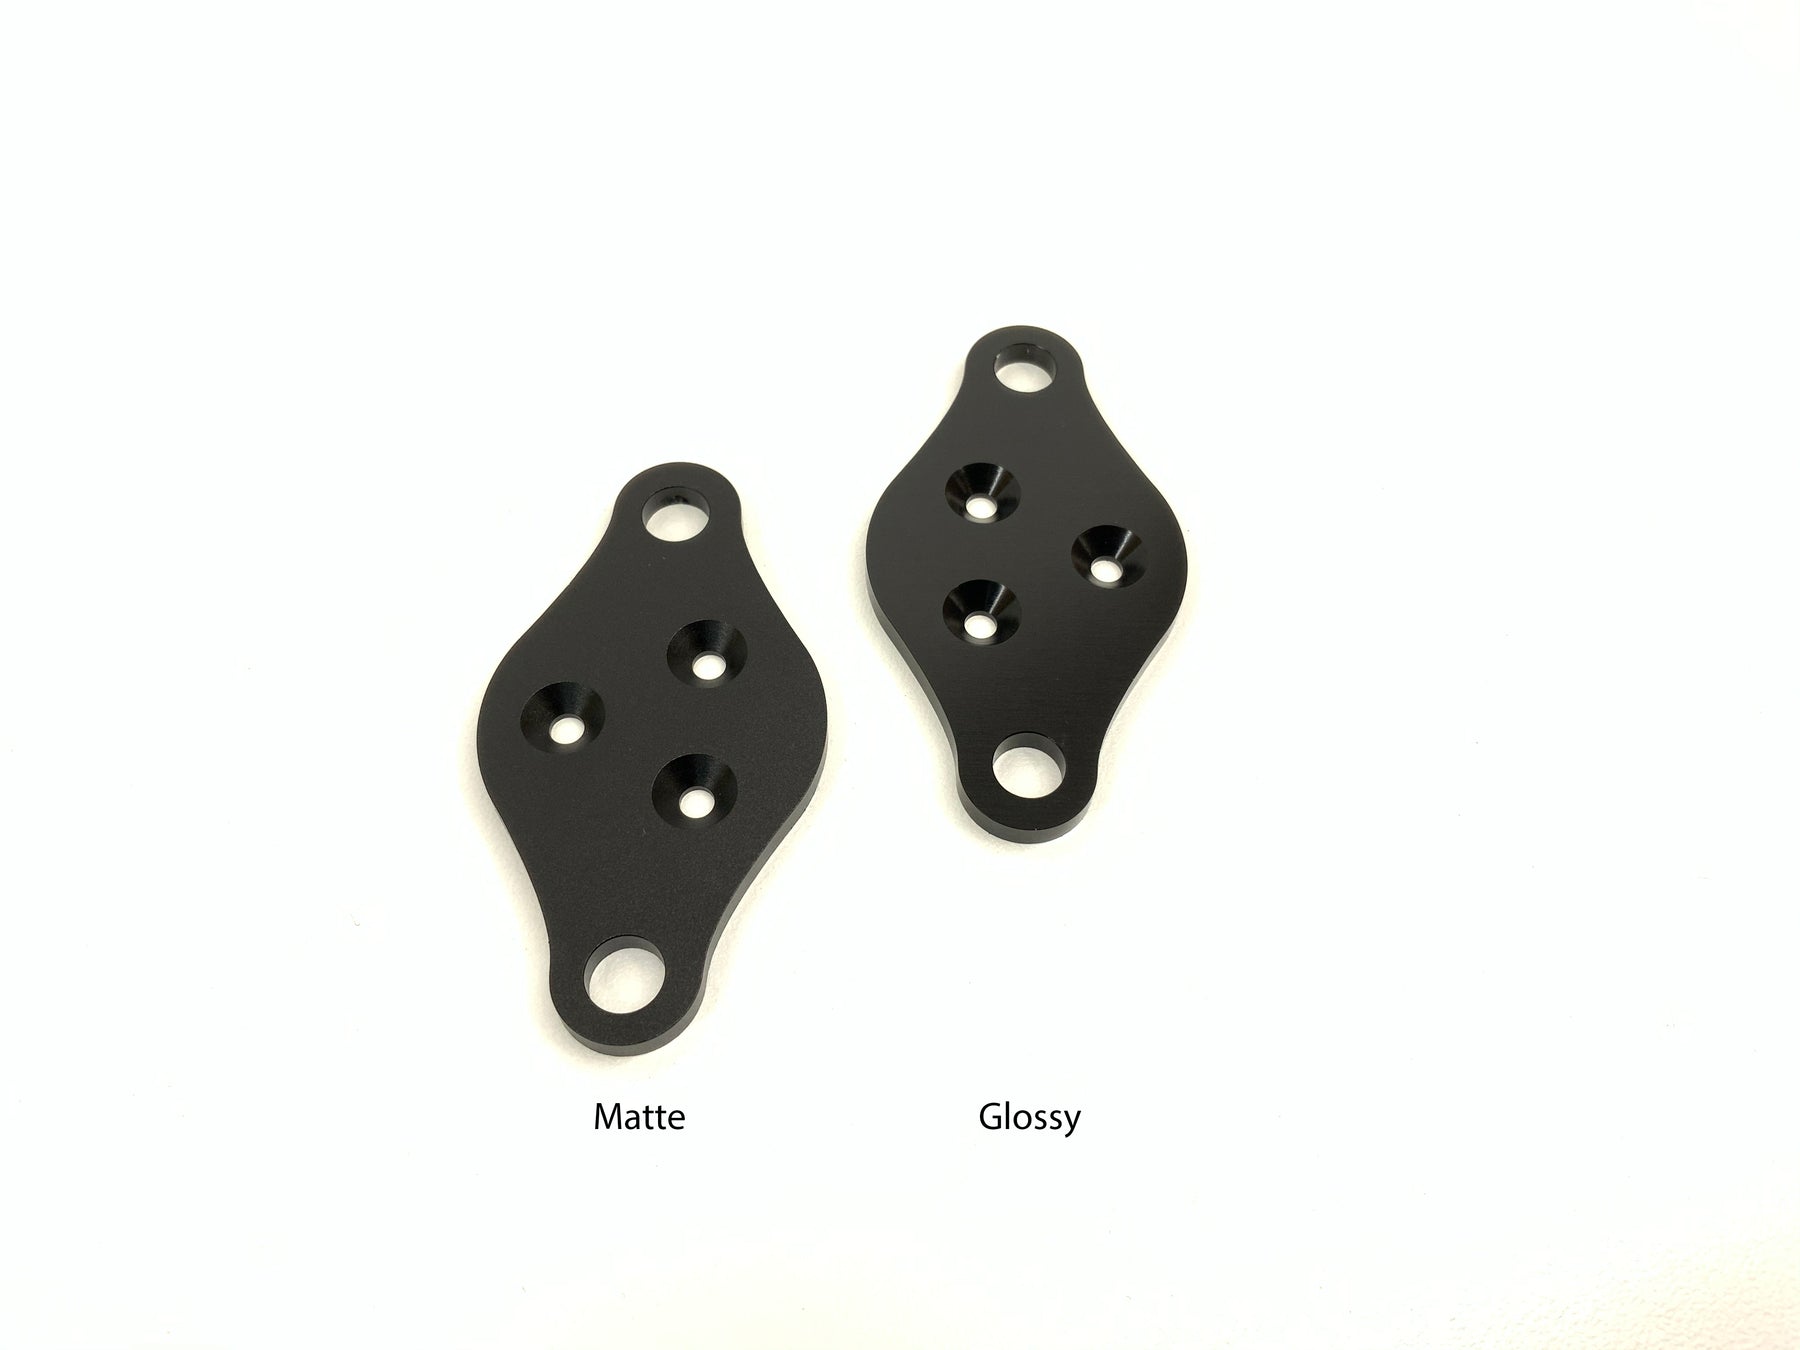 2 Hole AMPS Ball Mount - Glossy